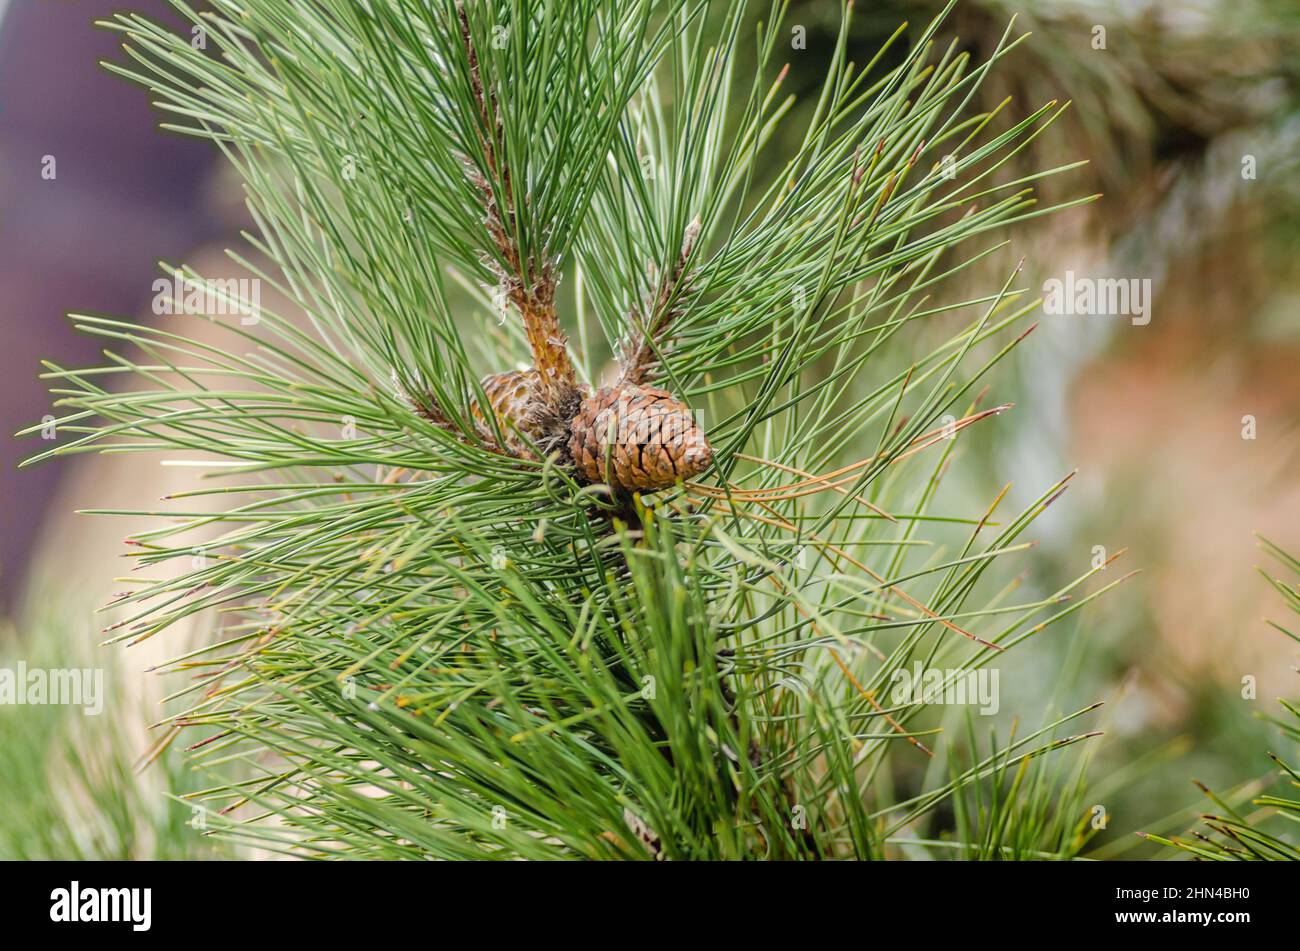 A young pine tree branch with cones in spring. Stock Photo